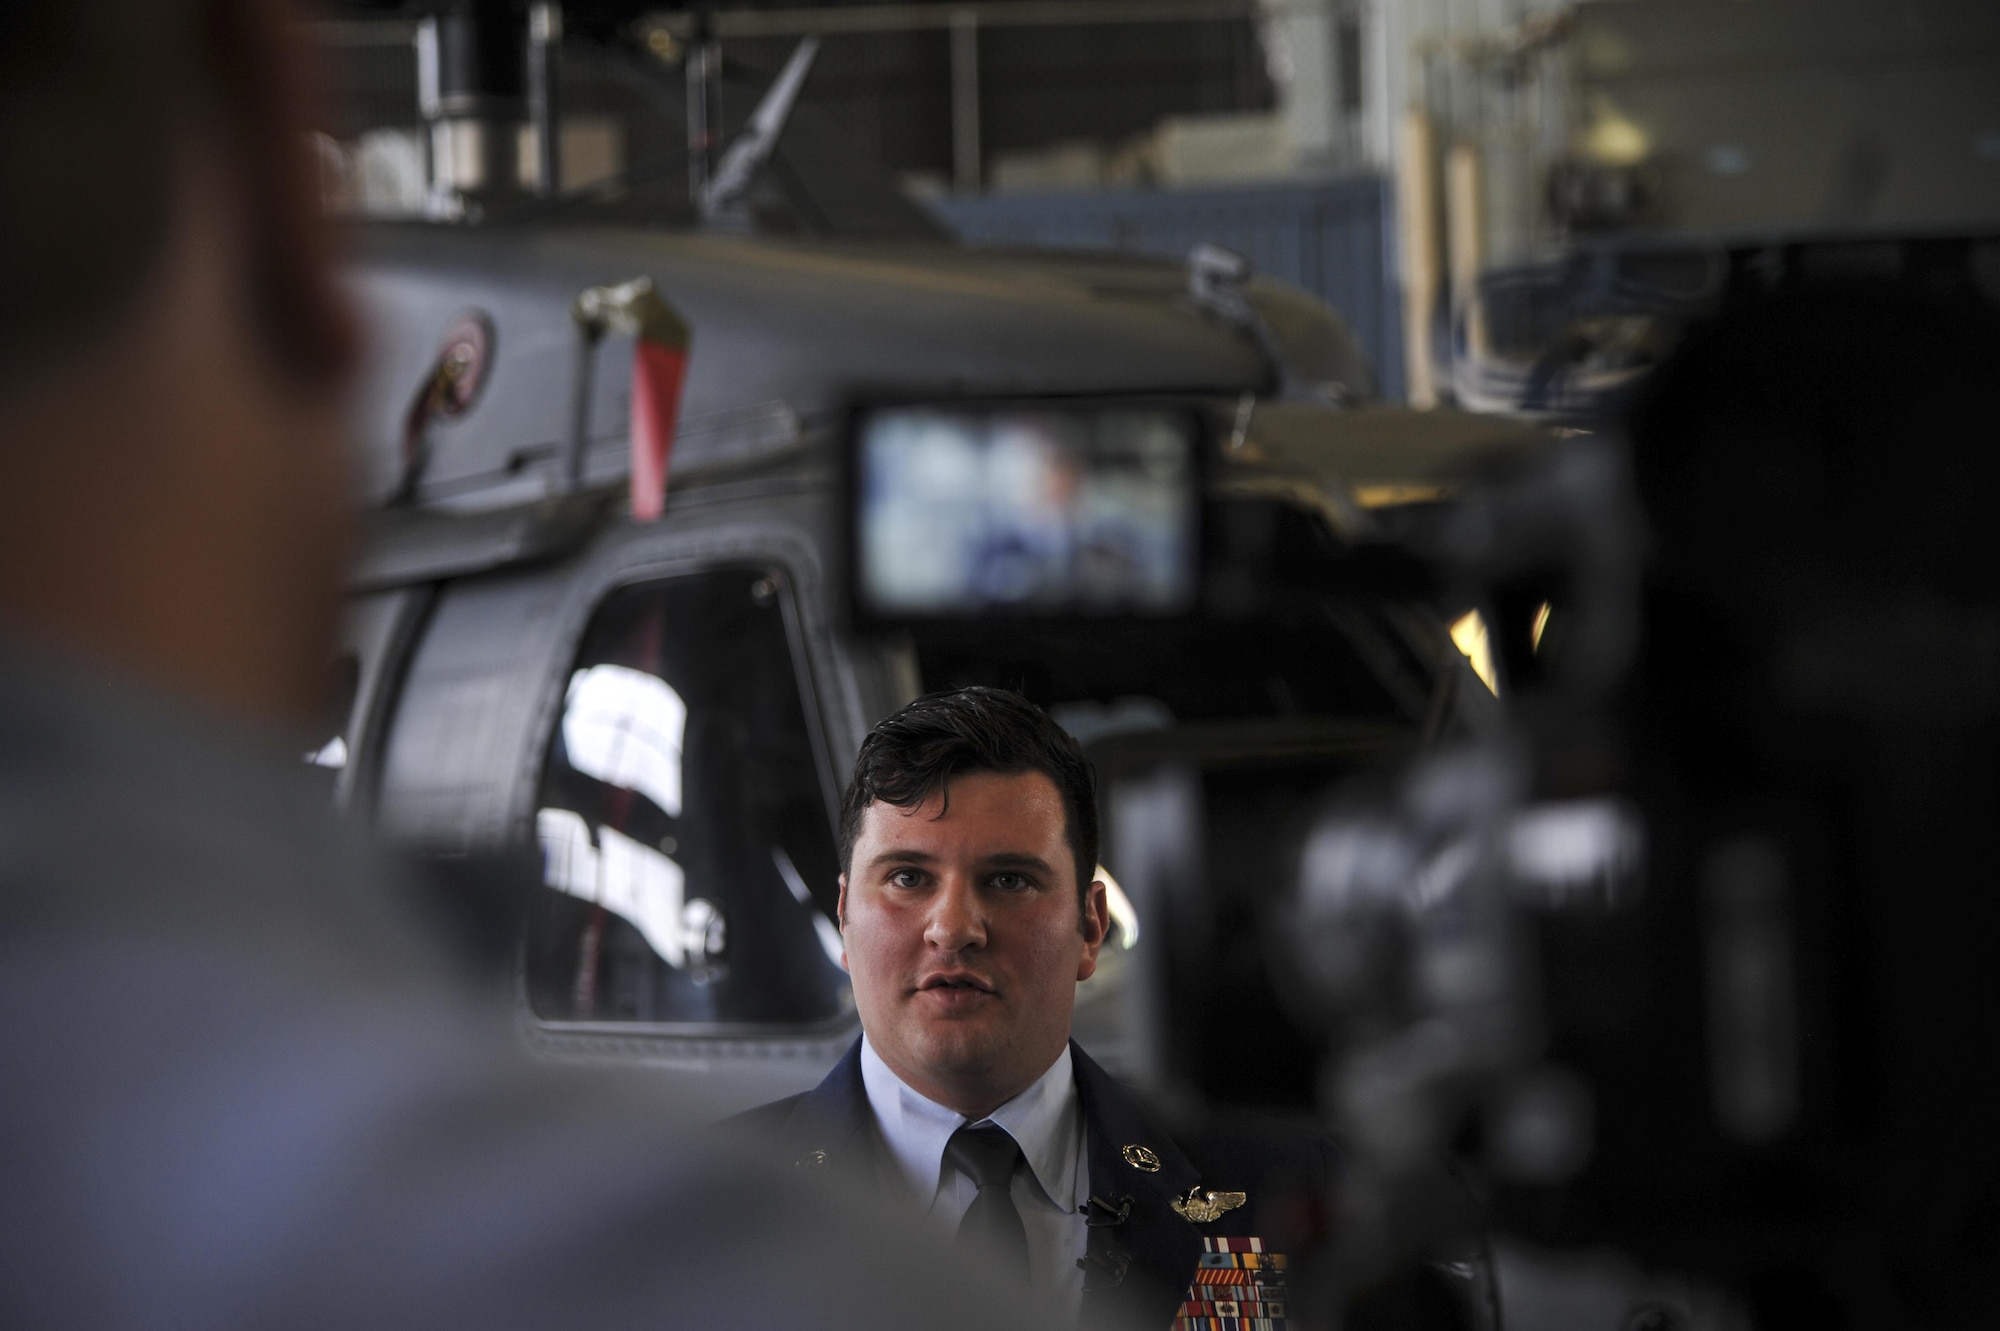 Master Sgt. Gregory Gibbs, 512th Rescue Squadron operations superintendent, interviews with local media outlets during the Distinguished Flying Cross medal ceremony at Kirtland Air Force Base, New Mexico, Jan. 13. Gibbs received the medal for his quick decision making that saved the lives of nine personnel during a 2011 tour of Afghanistan. (U.S. Air Force photo by Senior Airman Nigel Sandridge)